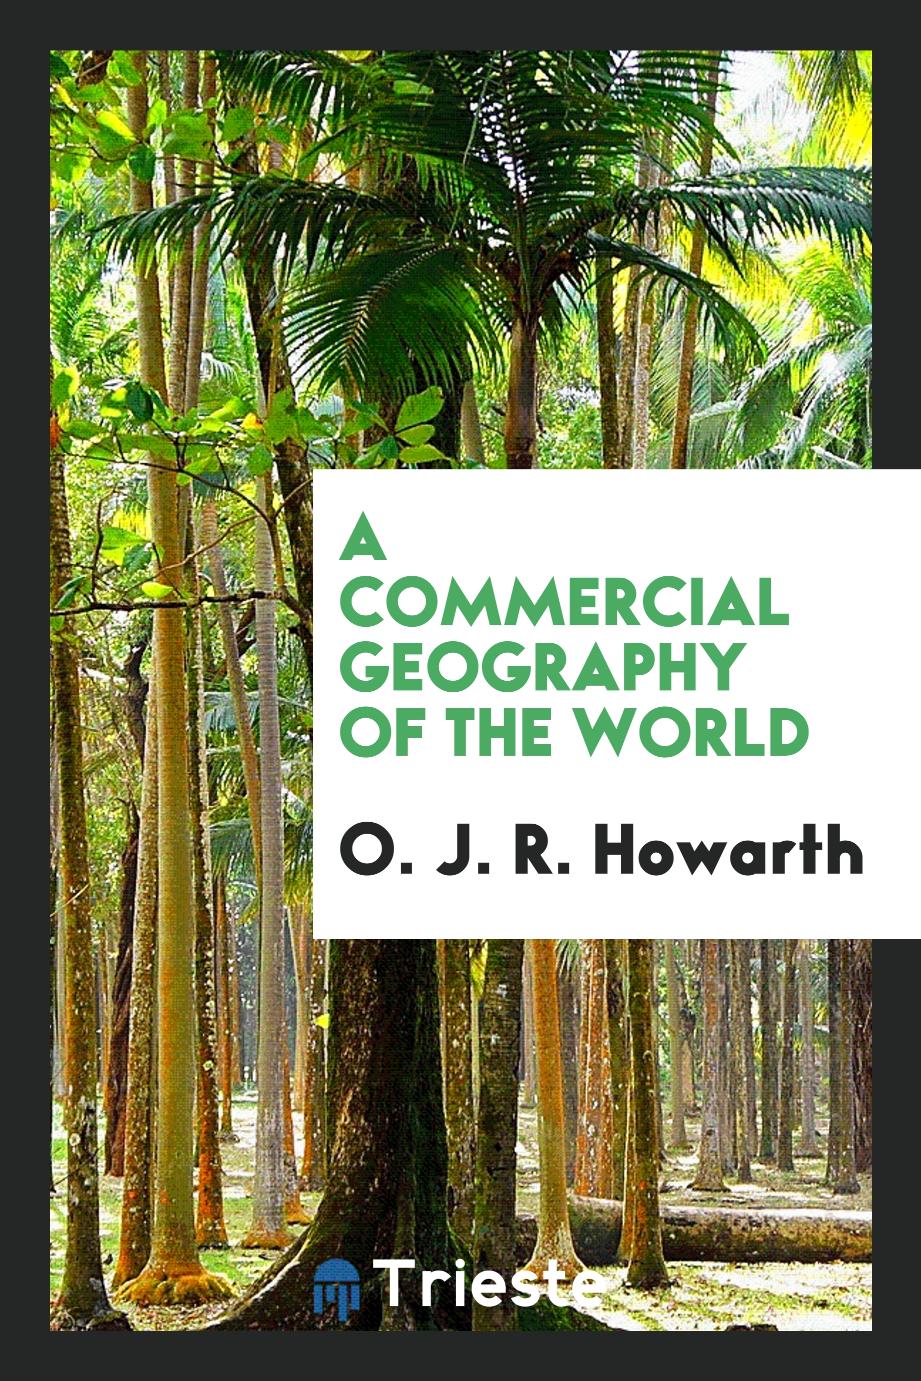 A commercial geography of the world